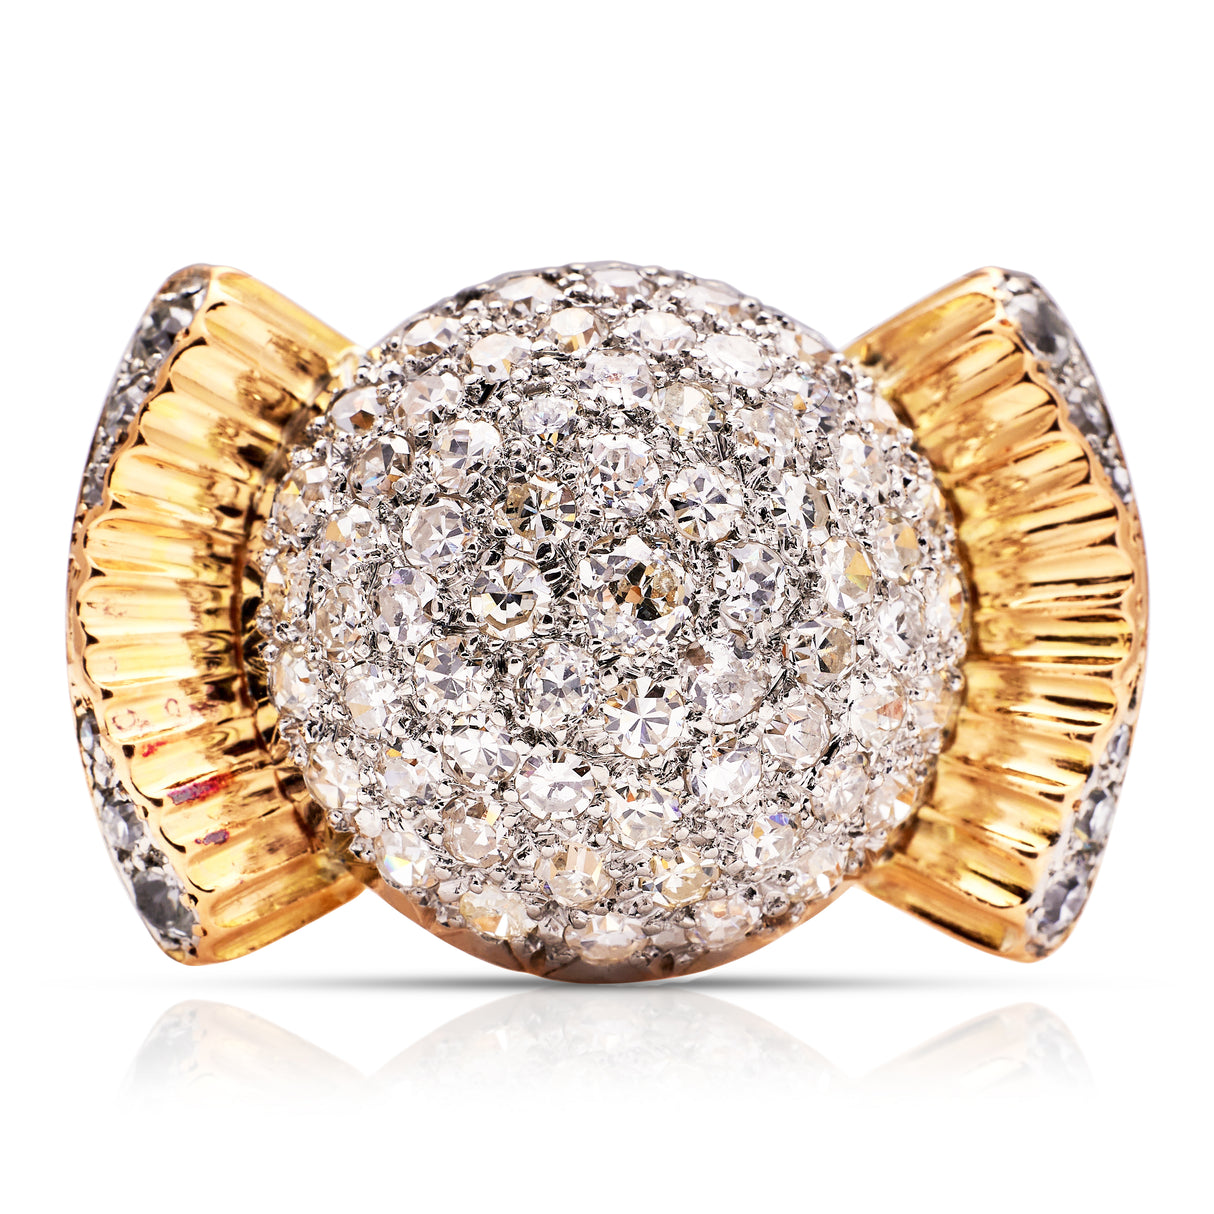 Cartier diamond bombe ring, front view. 